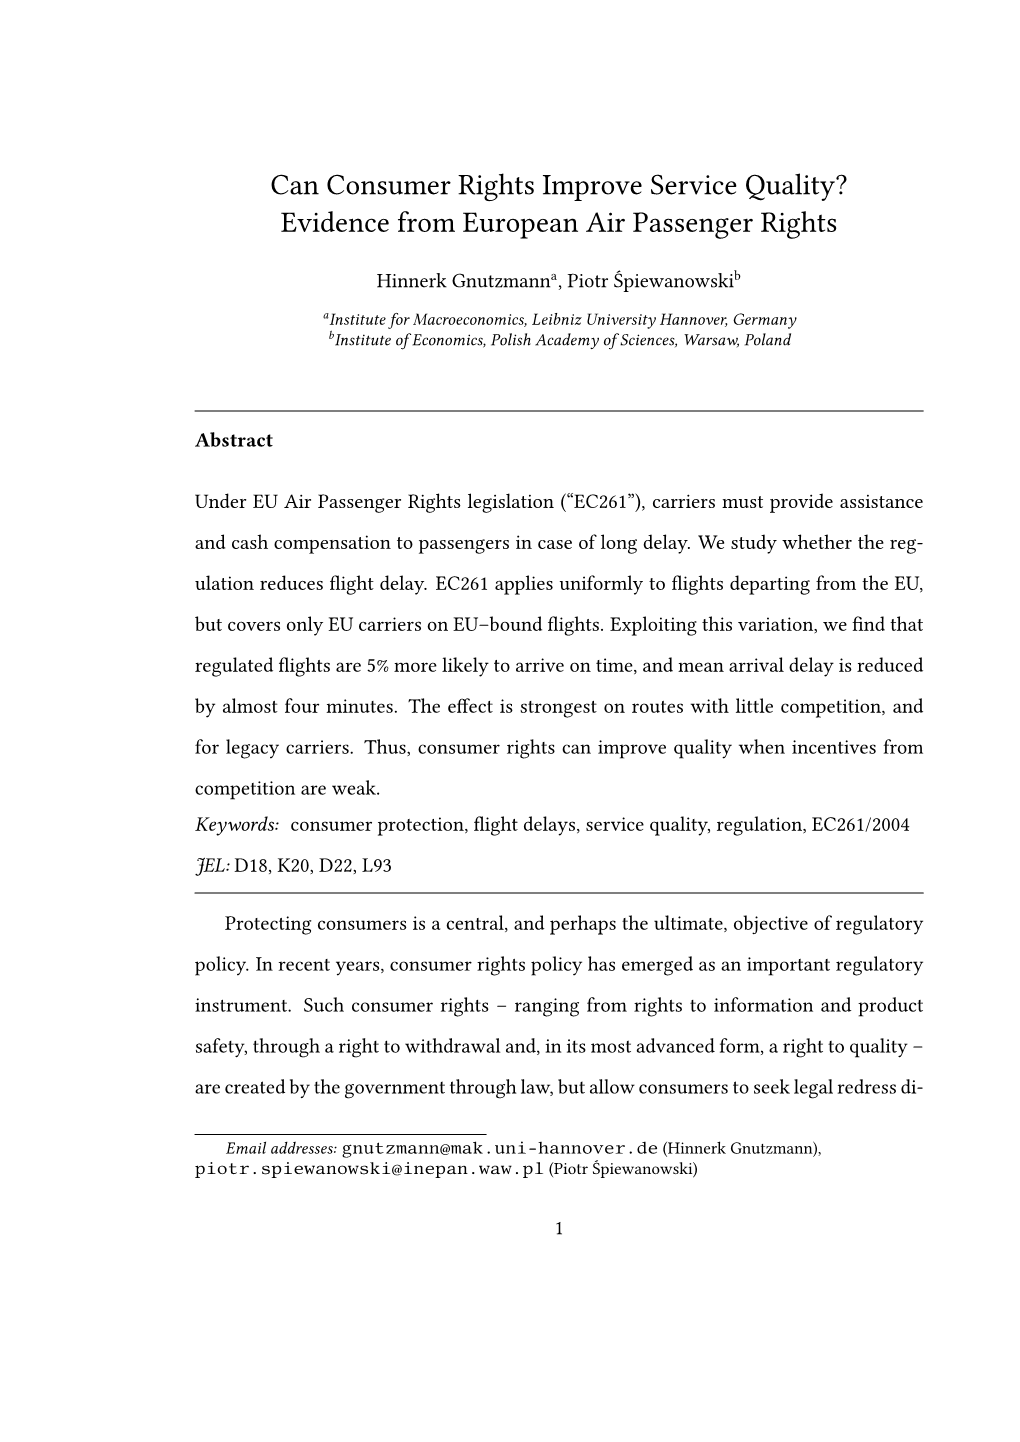 Evidence from European Air Passenger Rights